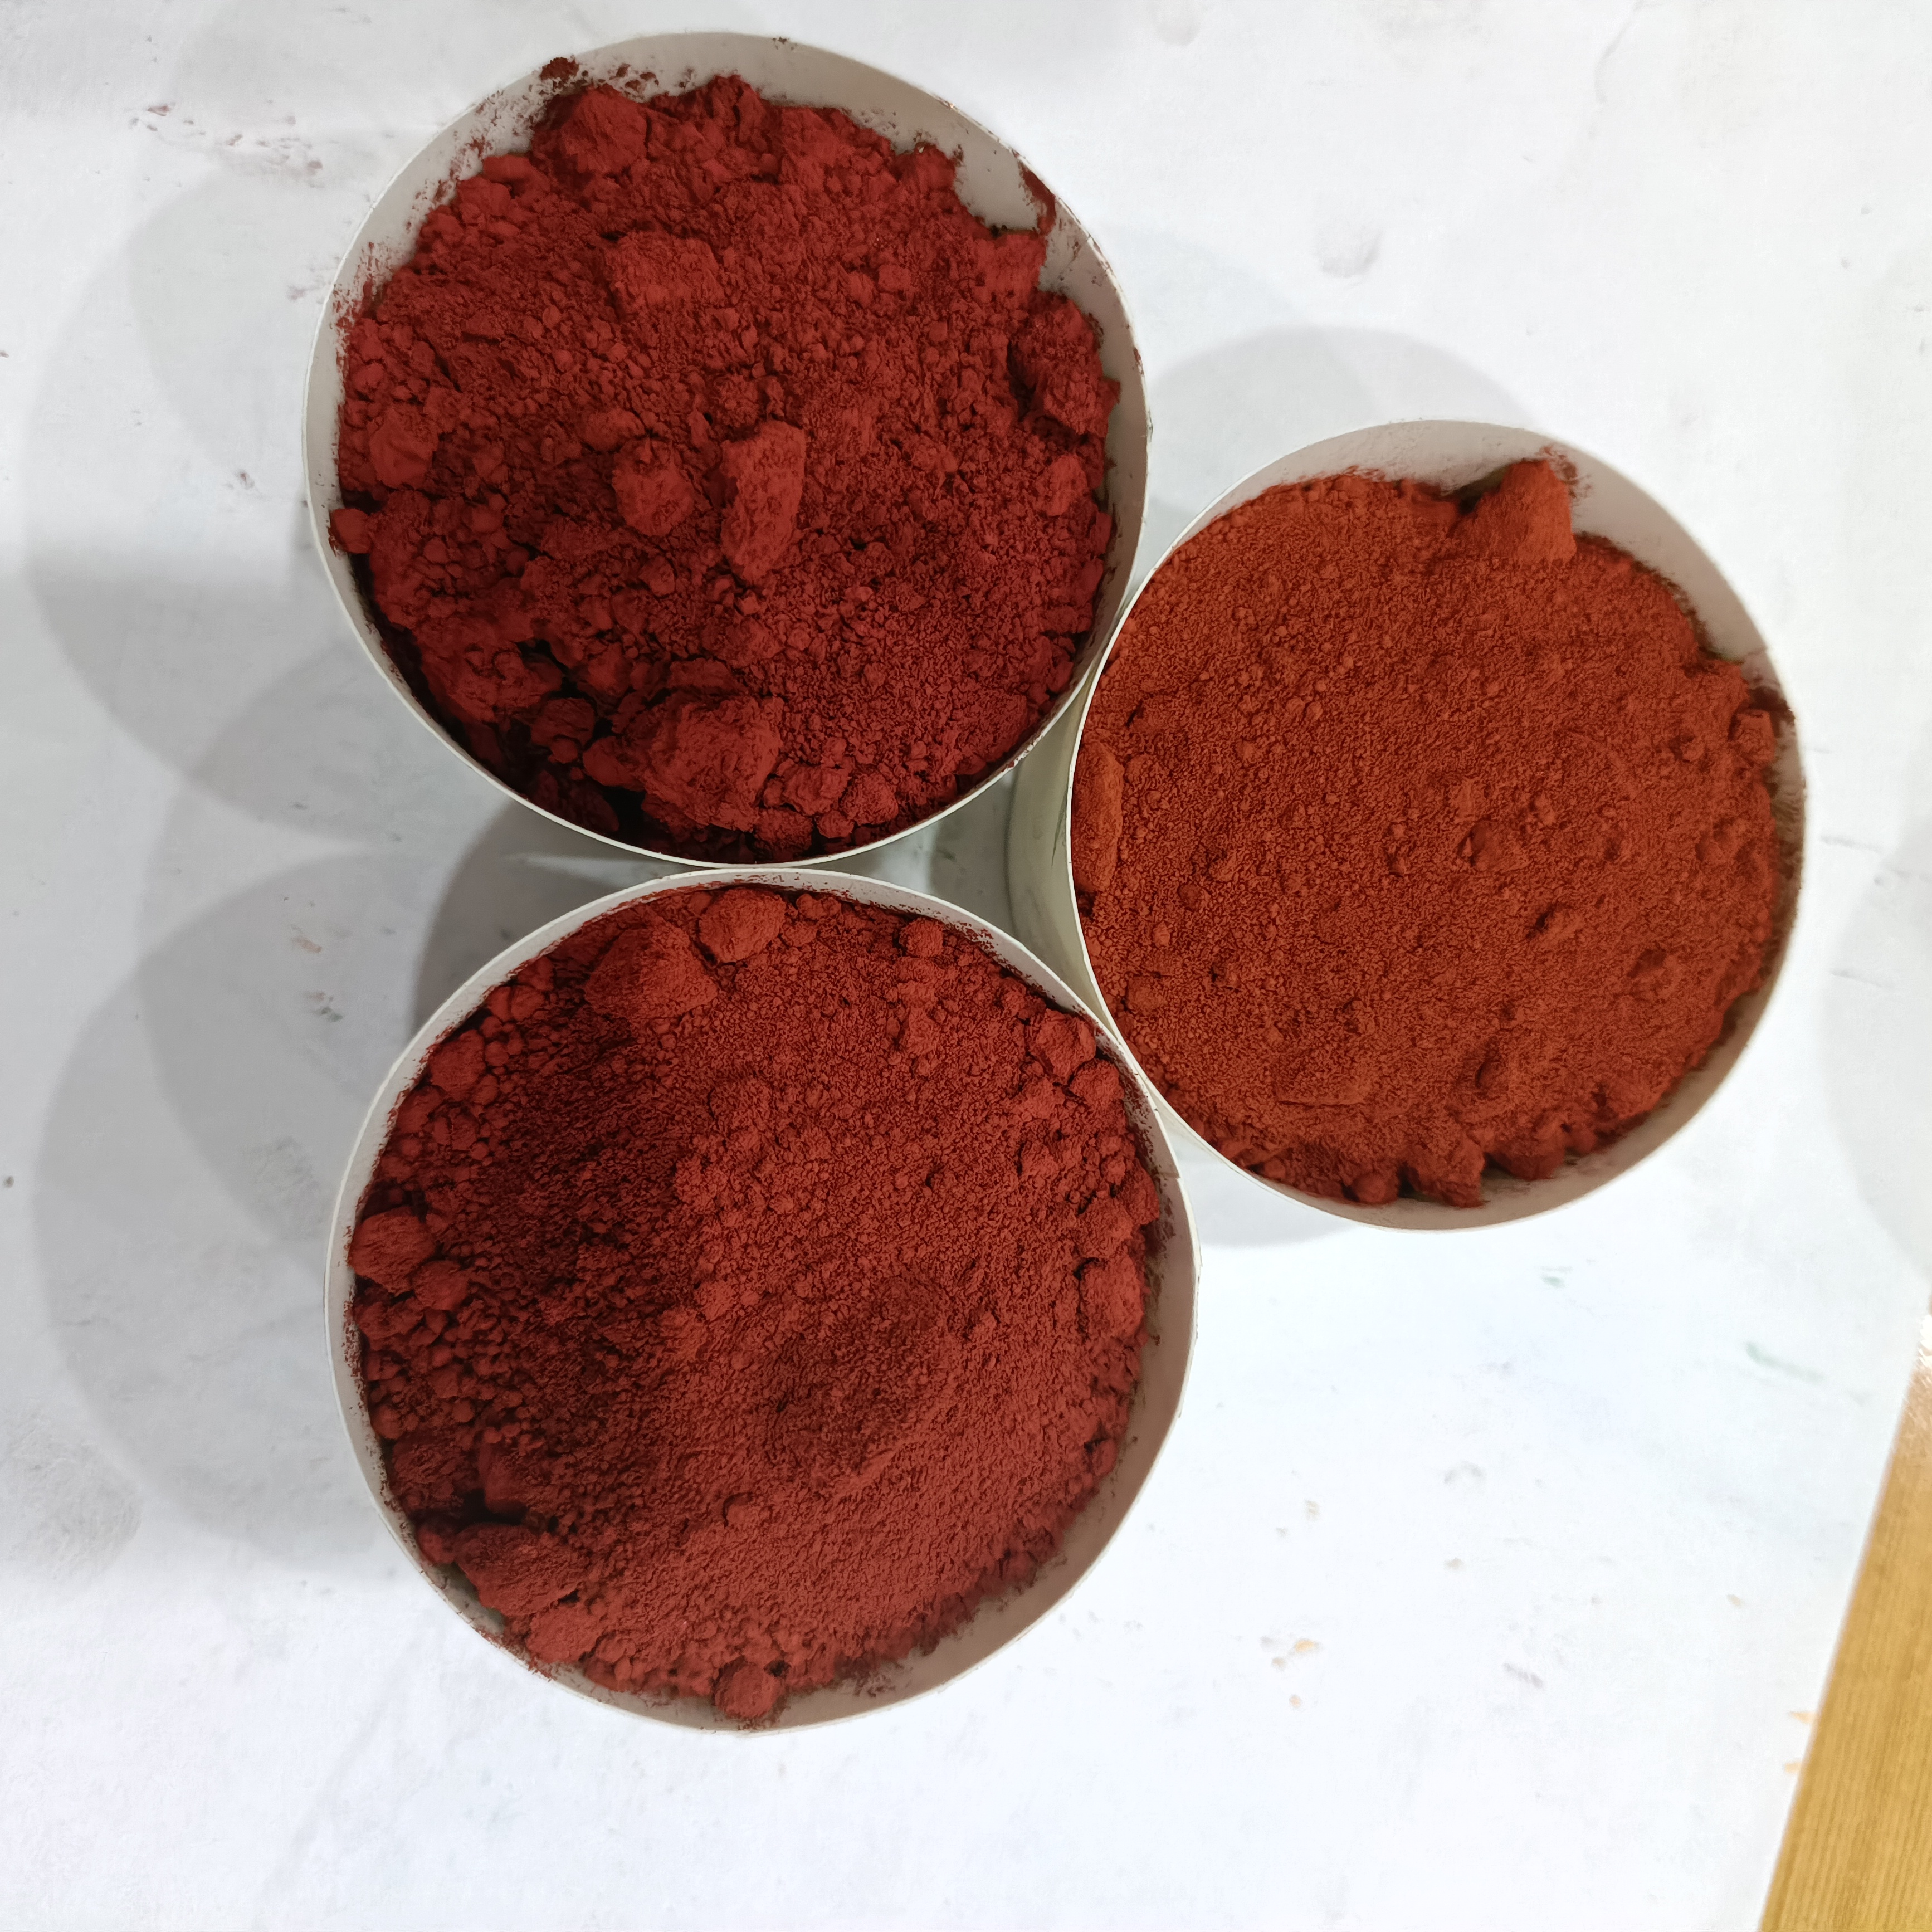 Iron oxide pigments are used in what industries